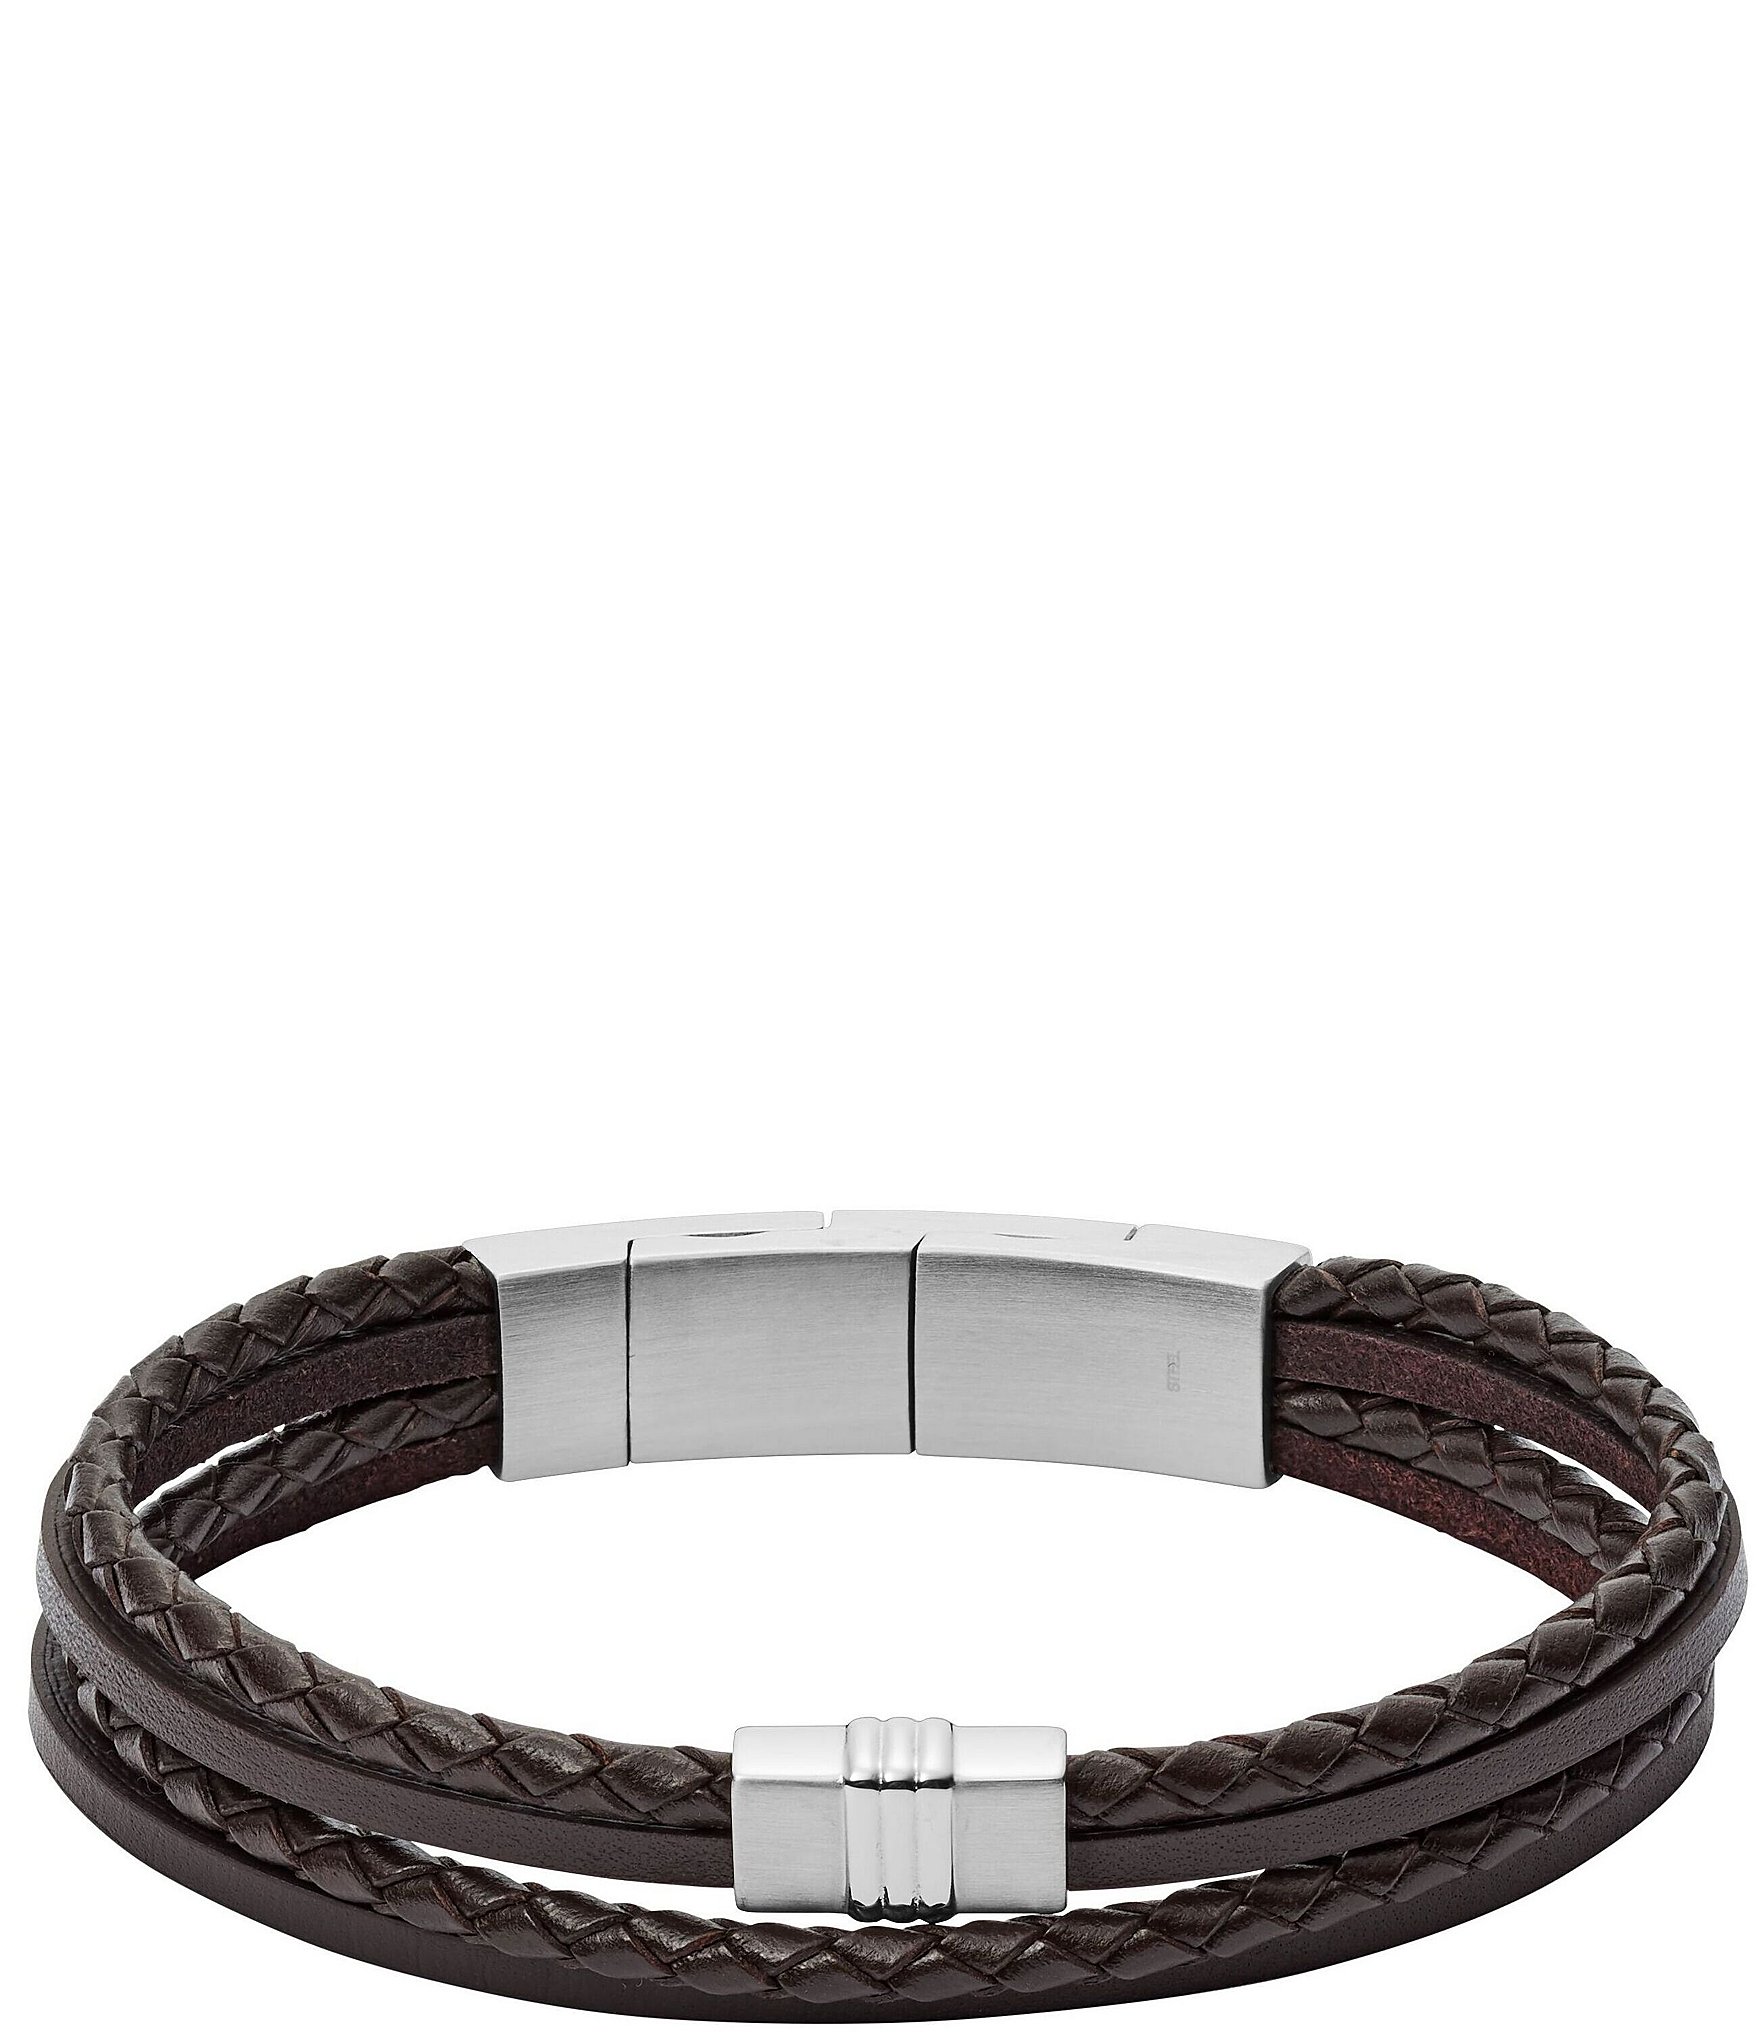 12 Not-Too-Flashy Bracelets for Guys Who Are New to Jewelry